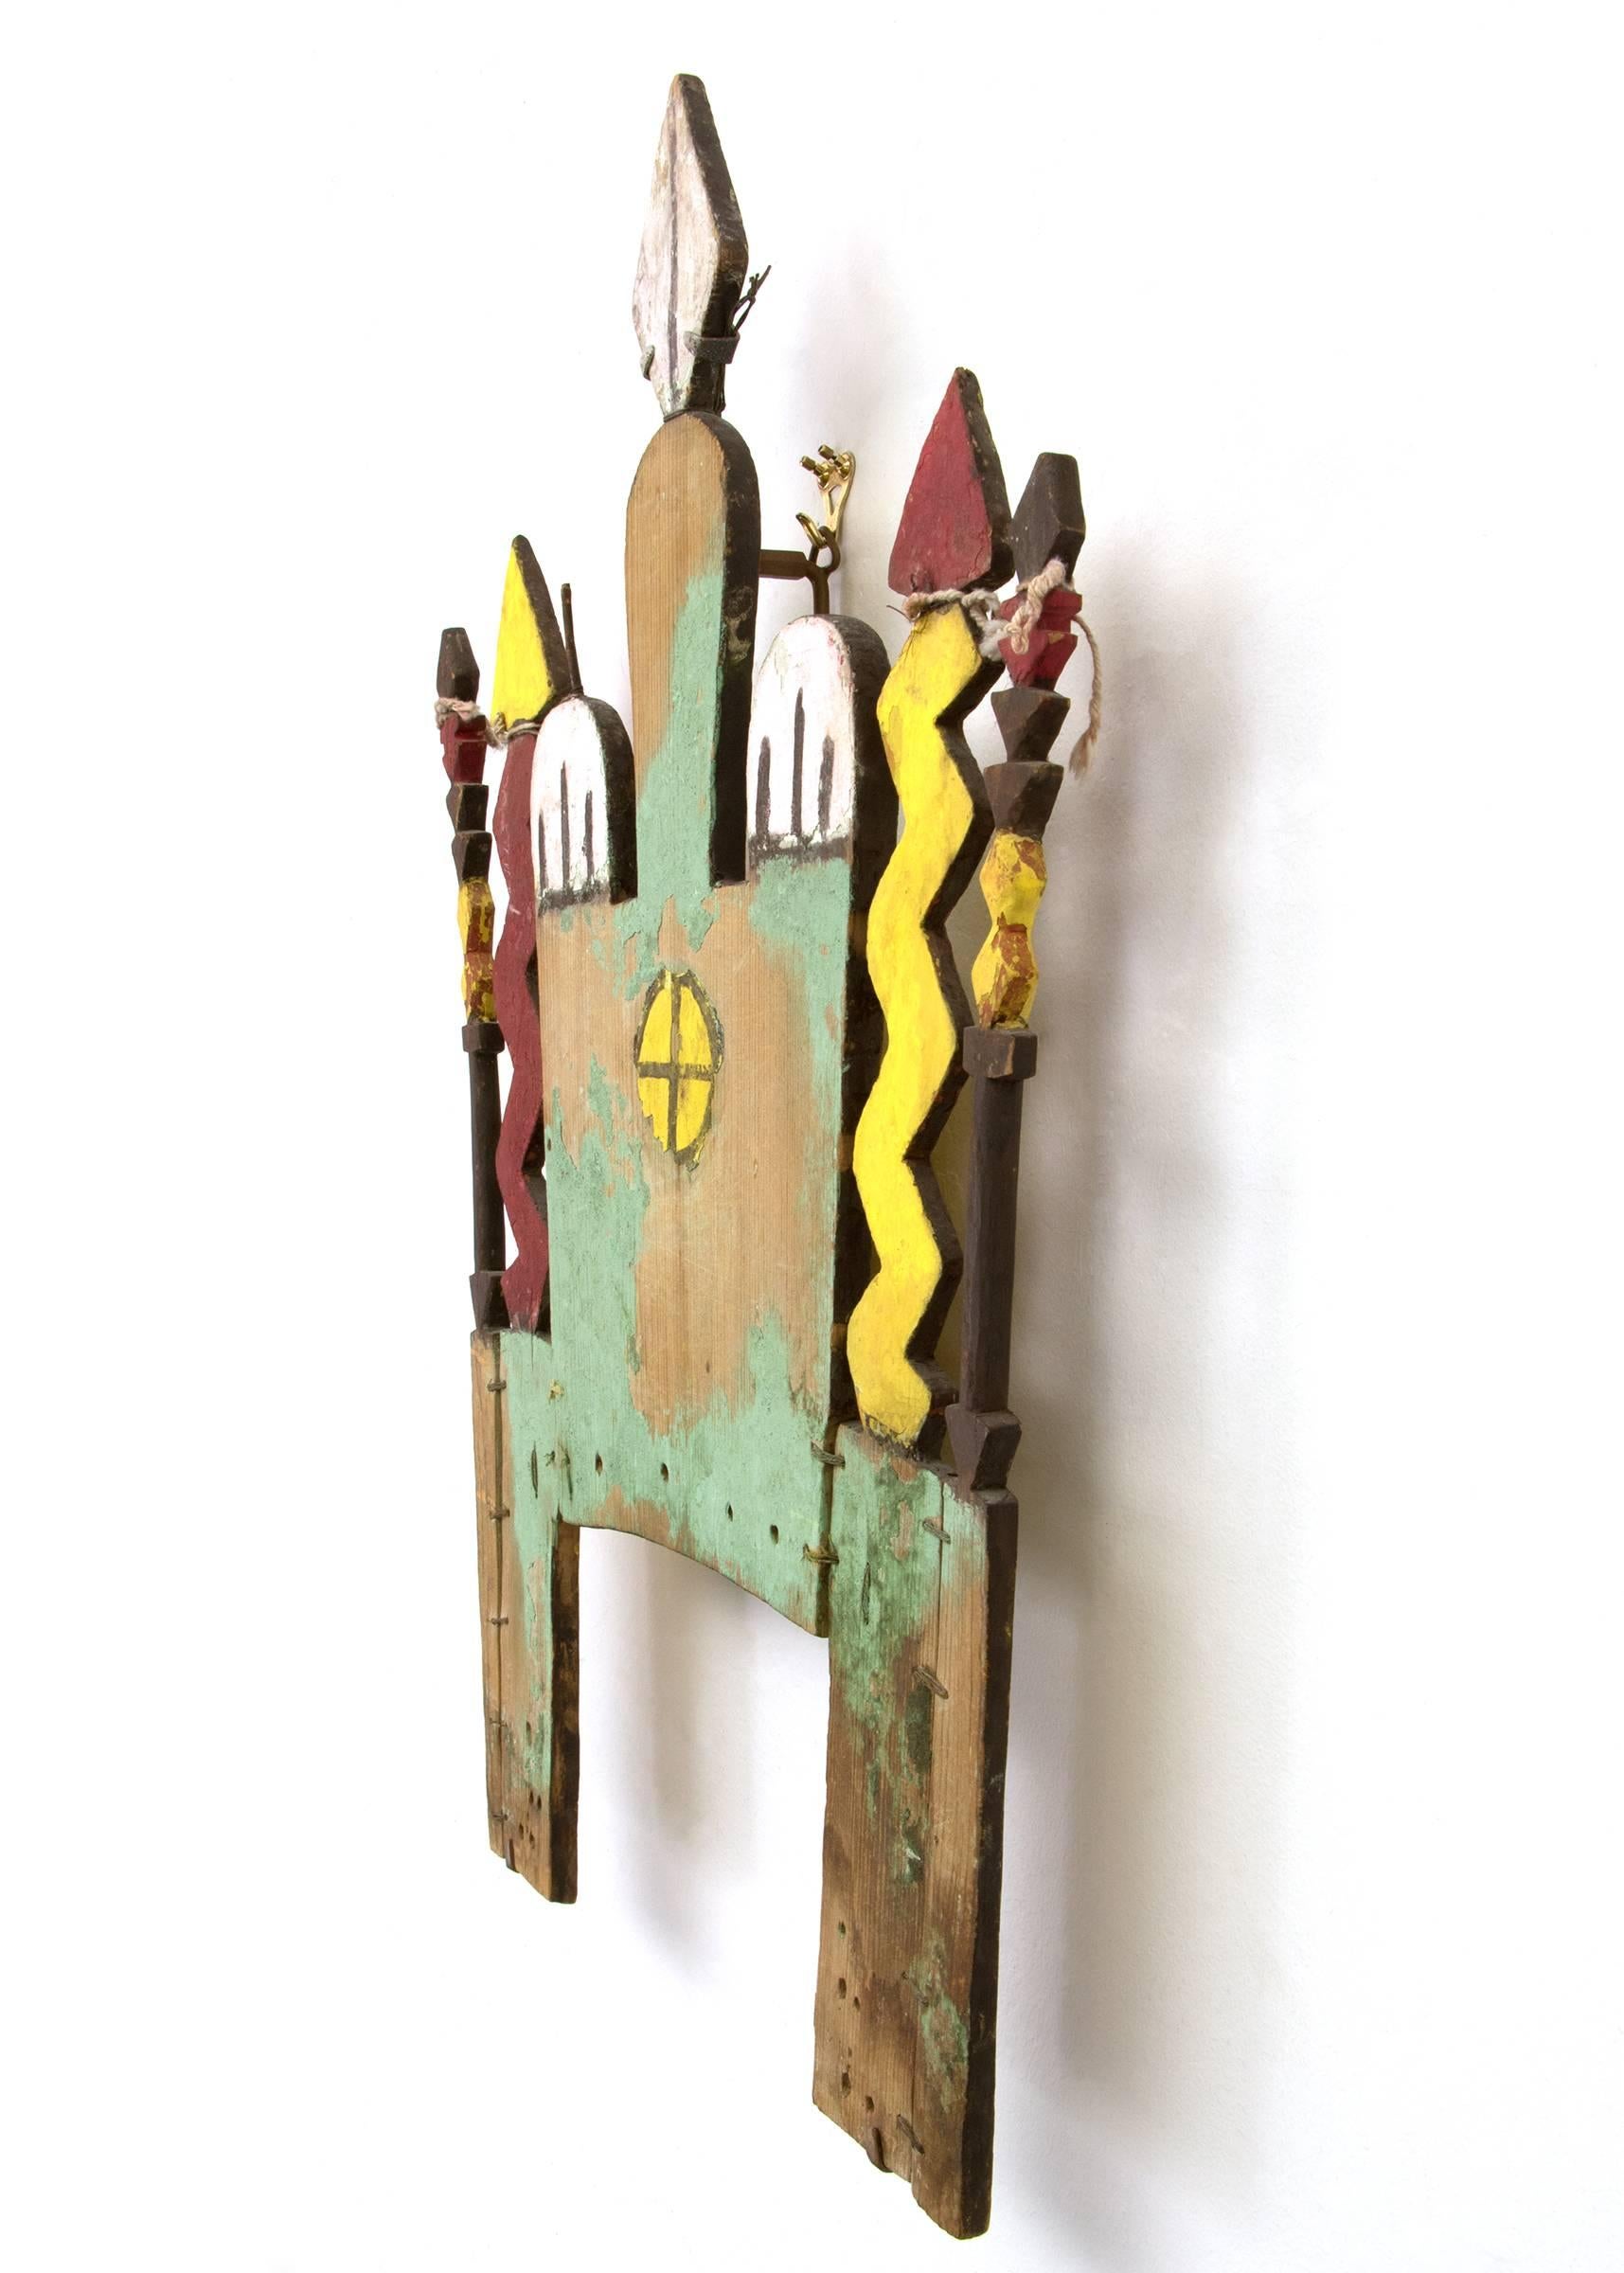 A remarkable early tableta, or headdress, constructed of cottonwood, carved and painted. Created by a Hopi in the late 19th century.

Custom display stand is included.

The Hopi tribe, now a sovereign nation, is located in Northeastern Arizona